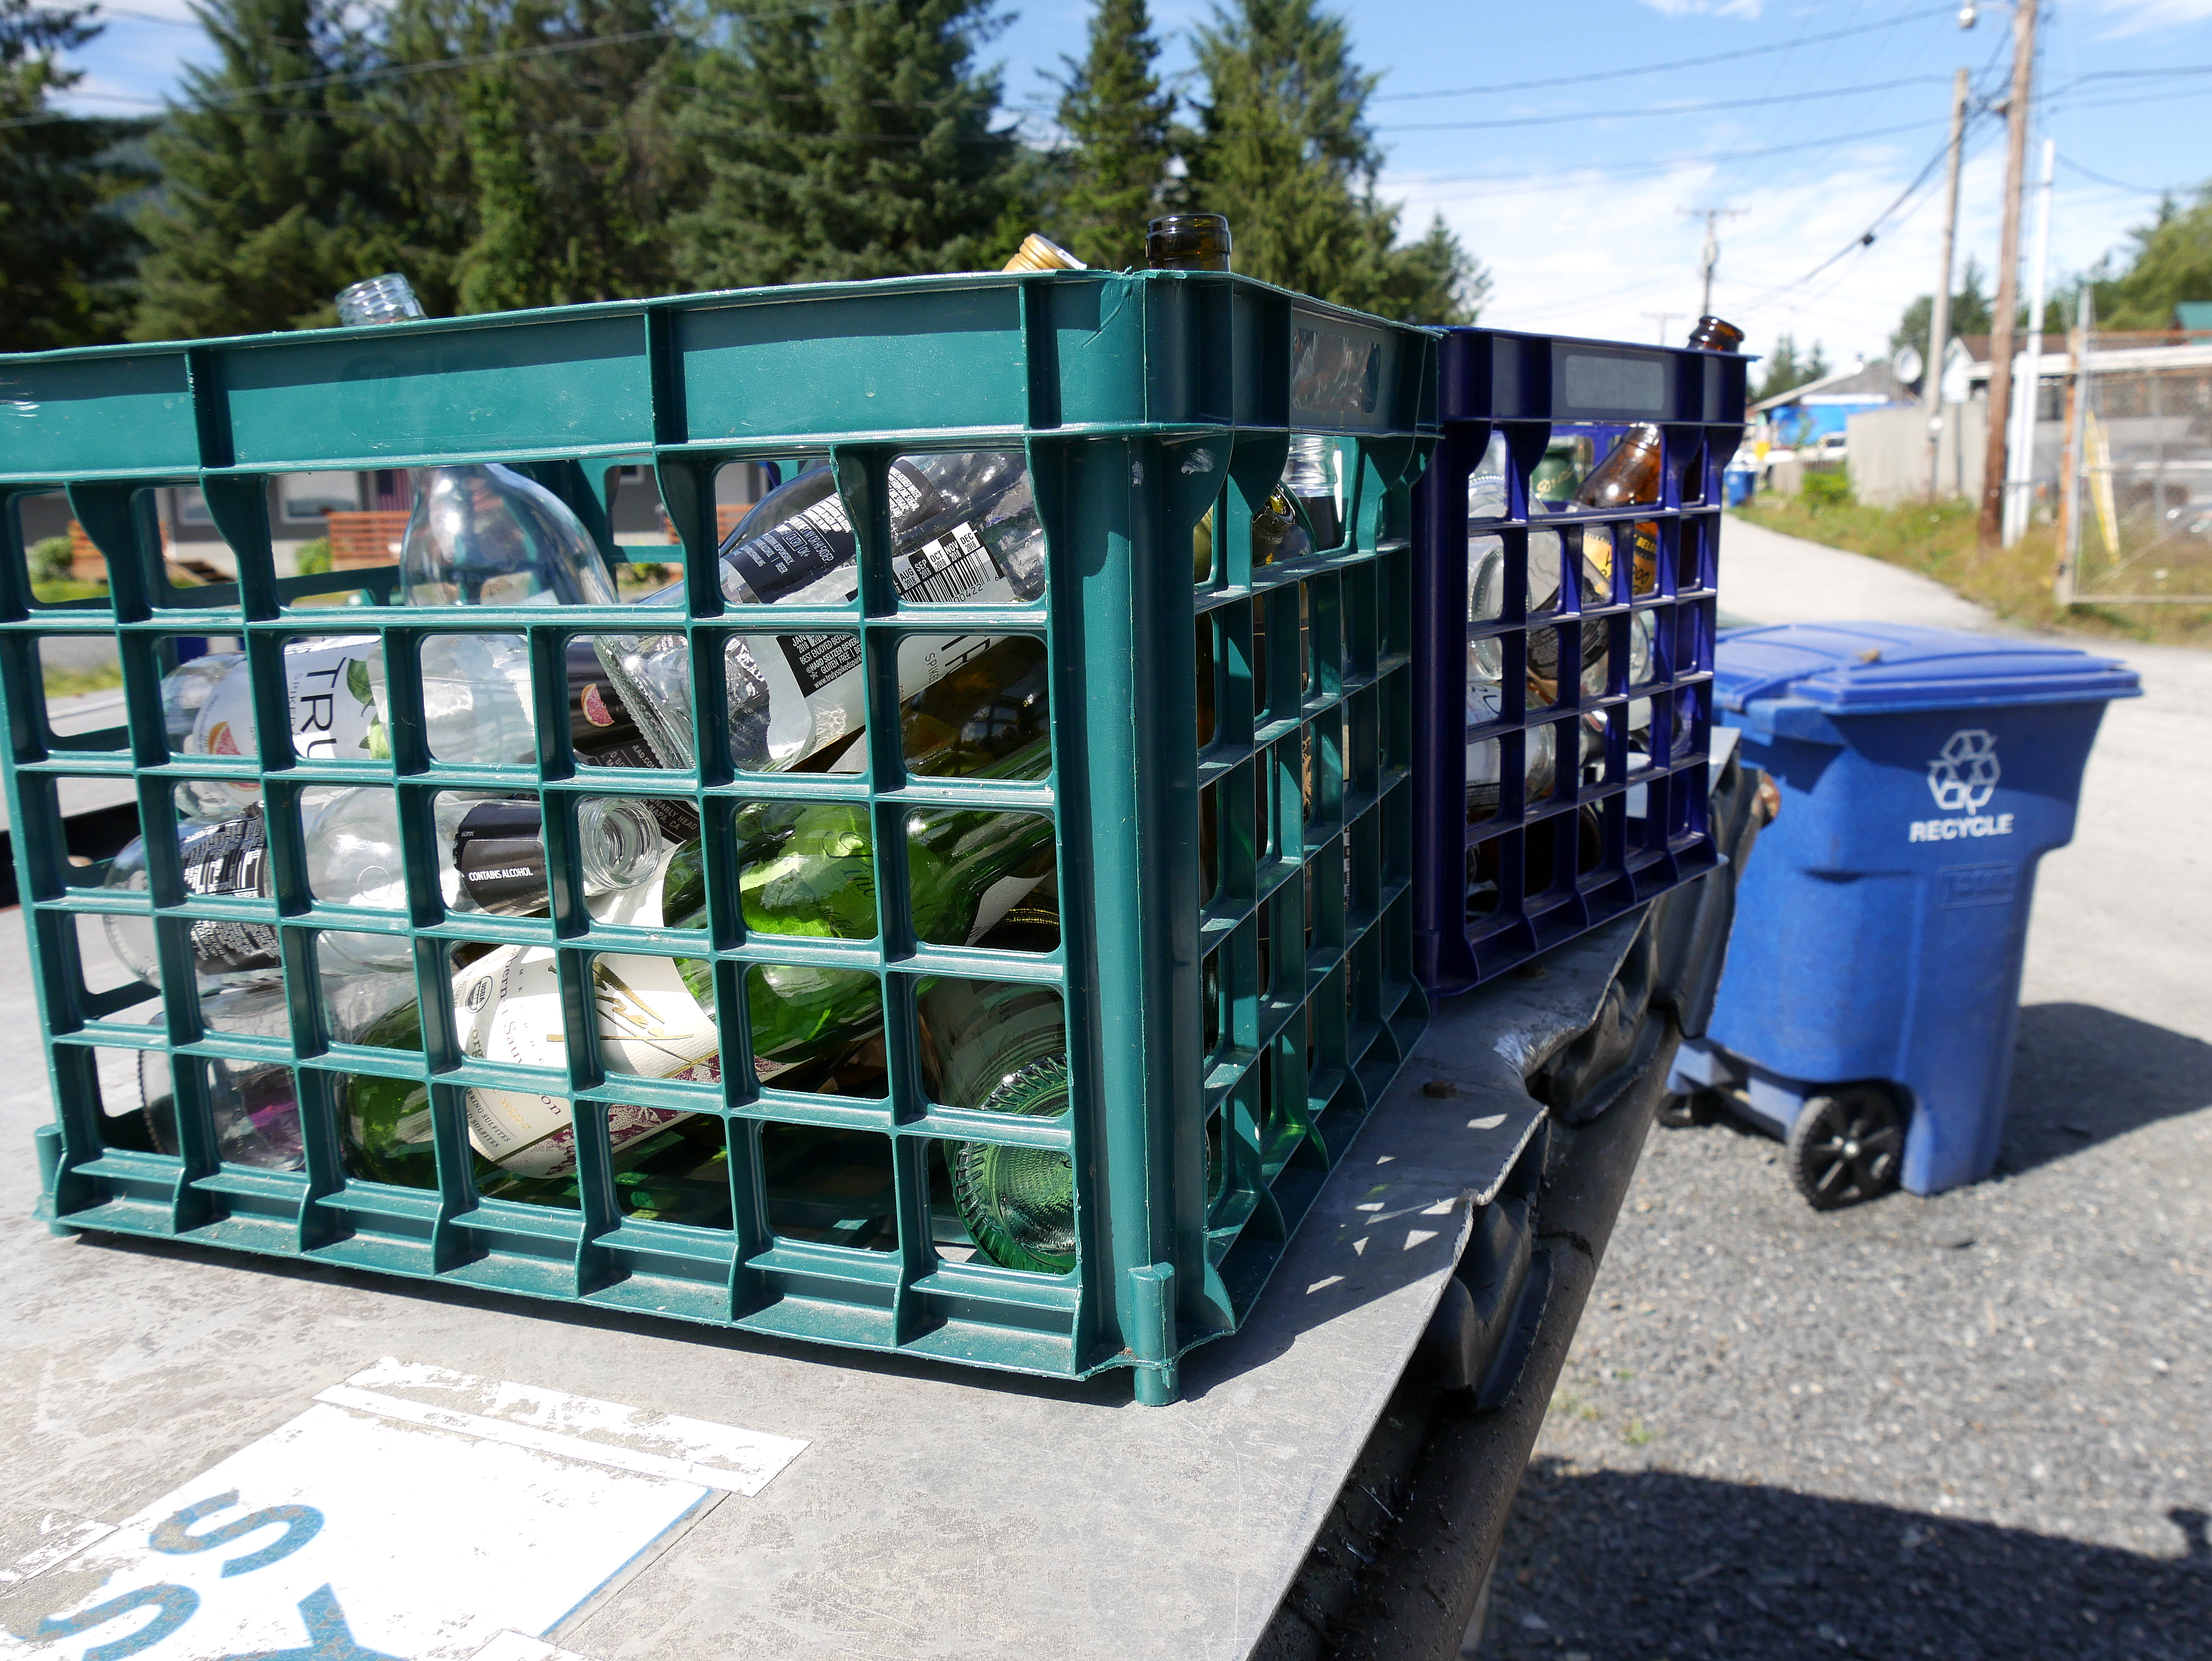 Crates of glass bottles sit on top of a “glass only” dumpster in Petersburg. (Photo by Angela Denning/KFSK)